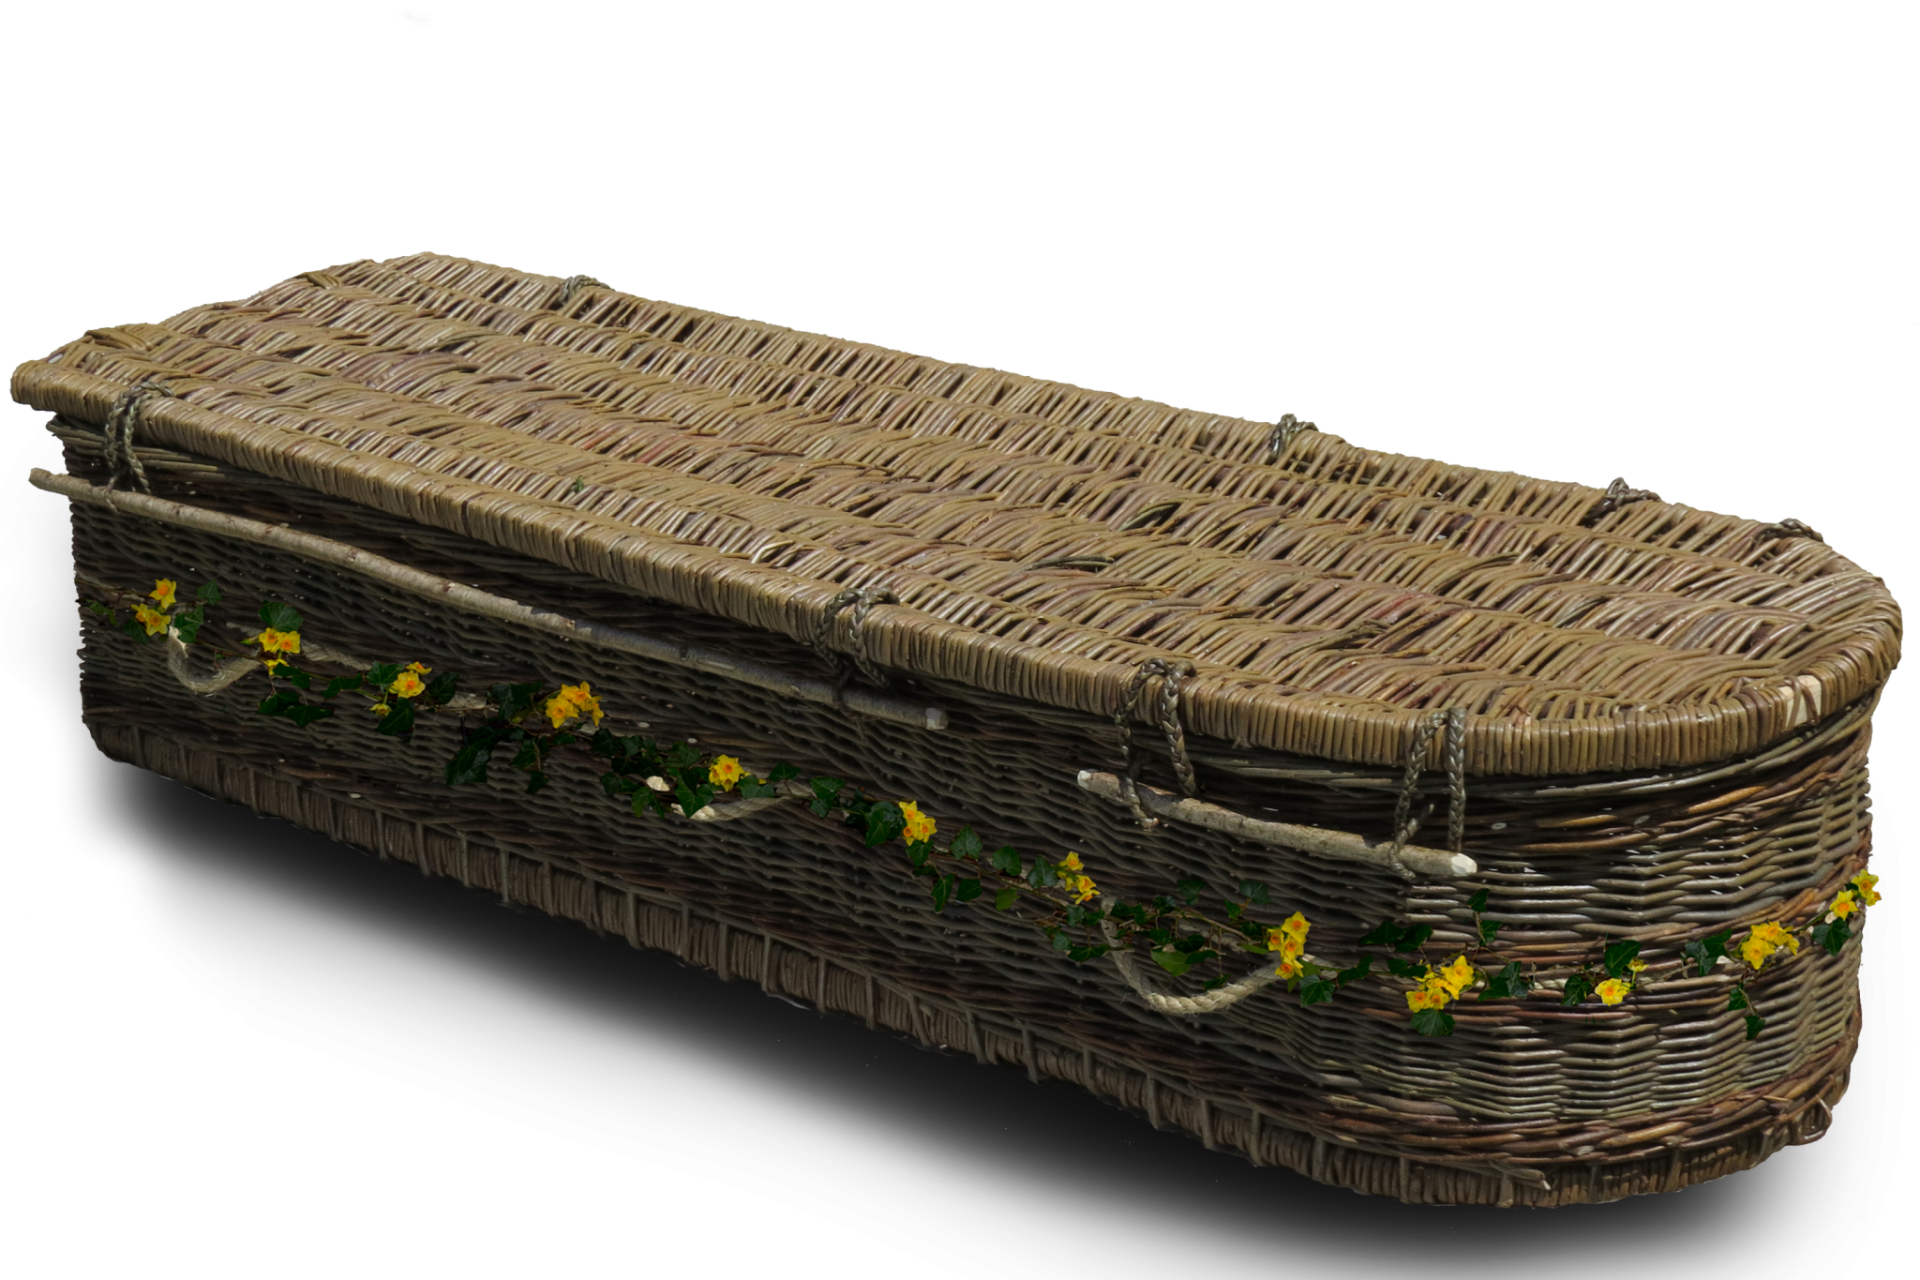 English Willow Wicker Coffins from Natural English Willow | Sussex Willow Coffins